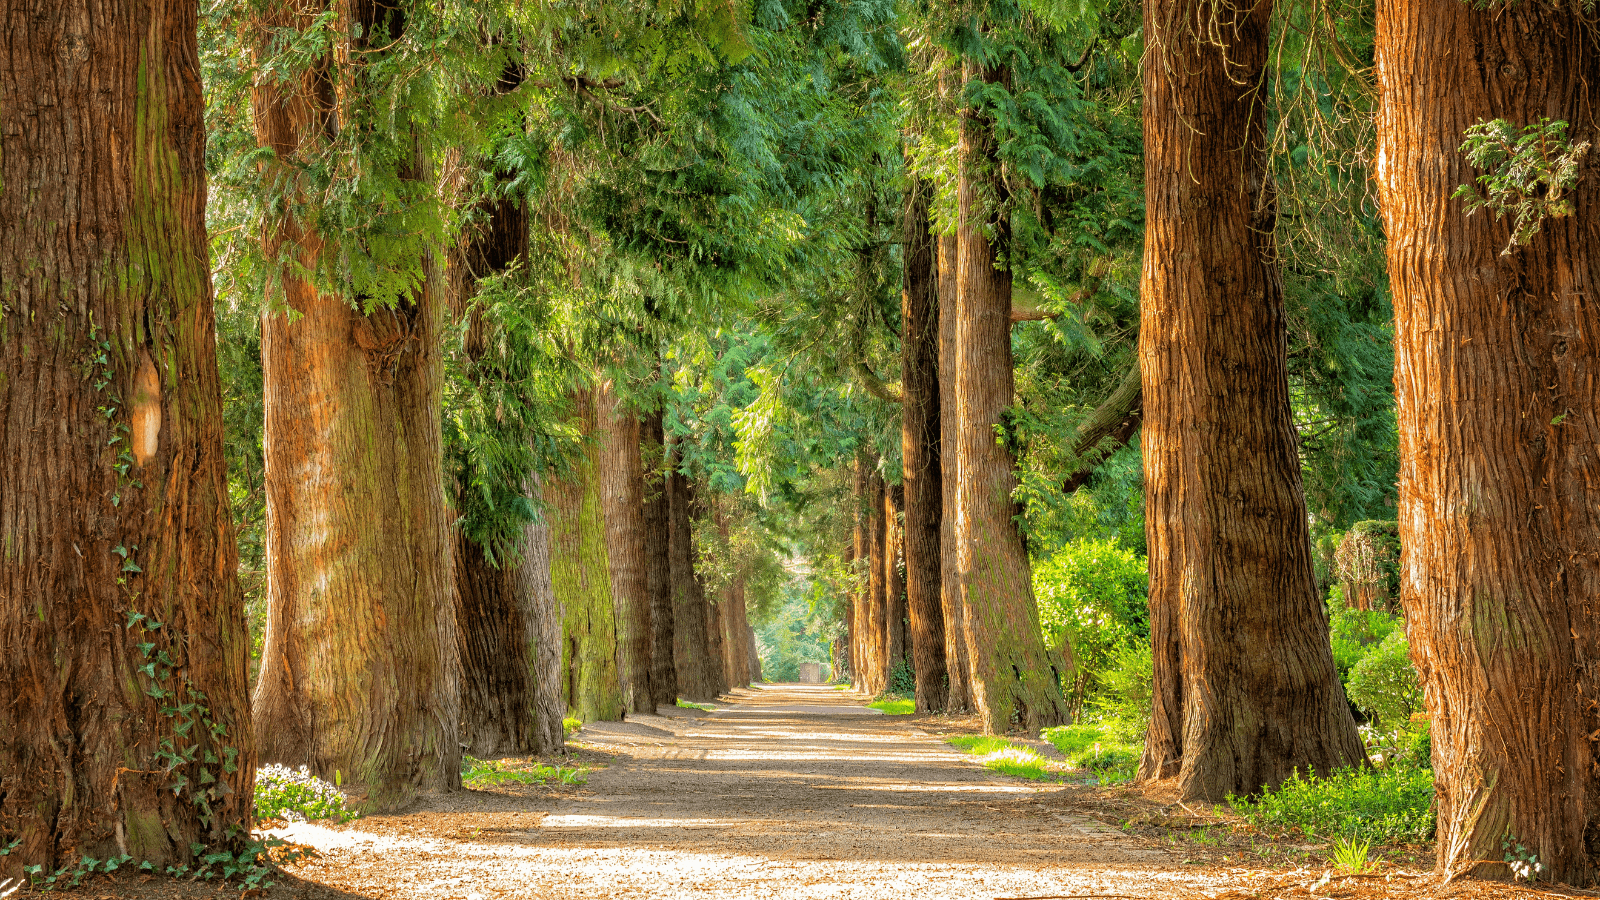 This image is of a forest path which signifies the continuous journey of workplace wellbeing.